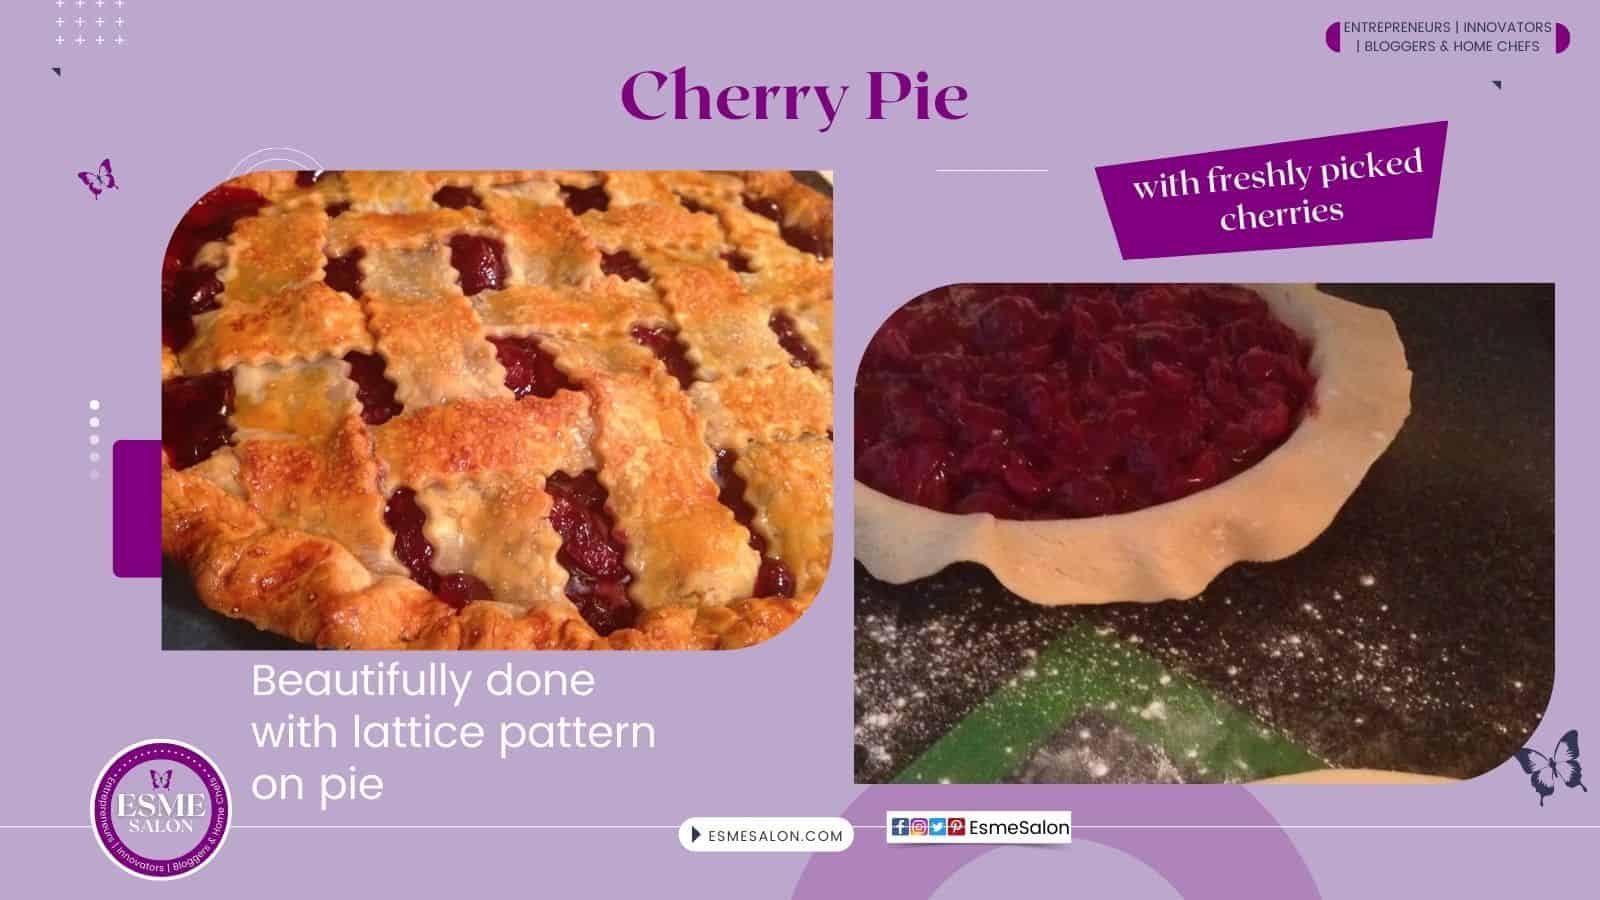 an image of Cherry Pie with lattice pattern as well as cherry filling in the pie crust ready to be baked